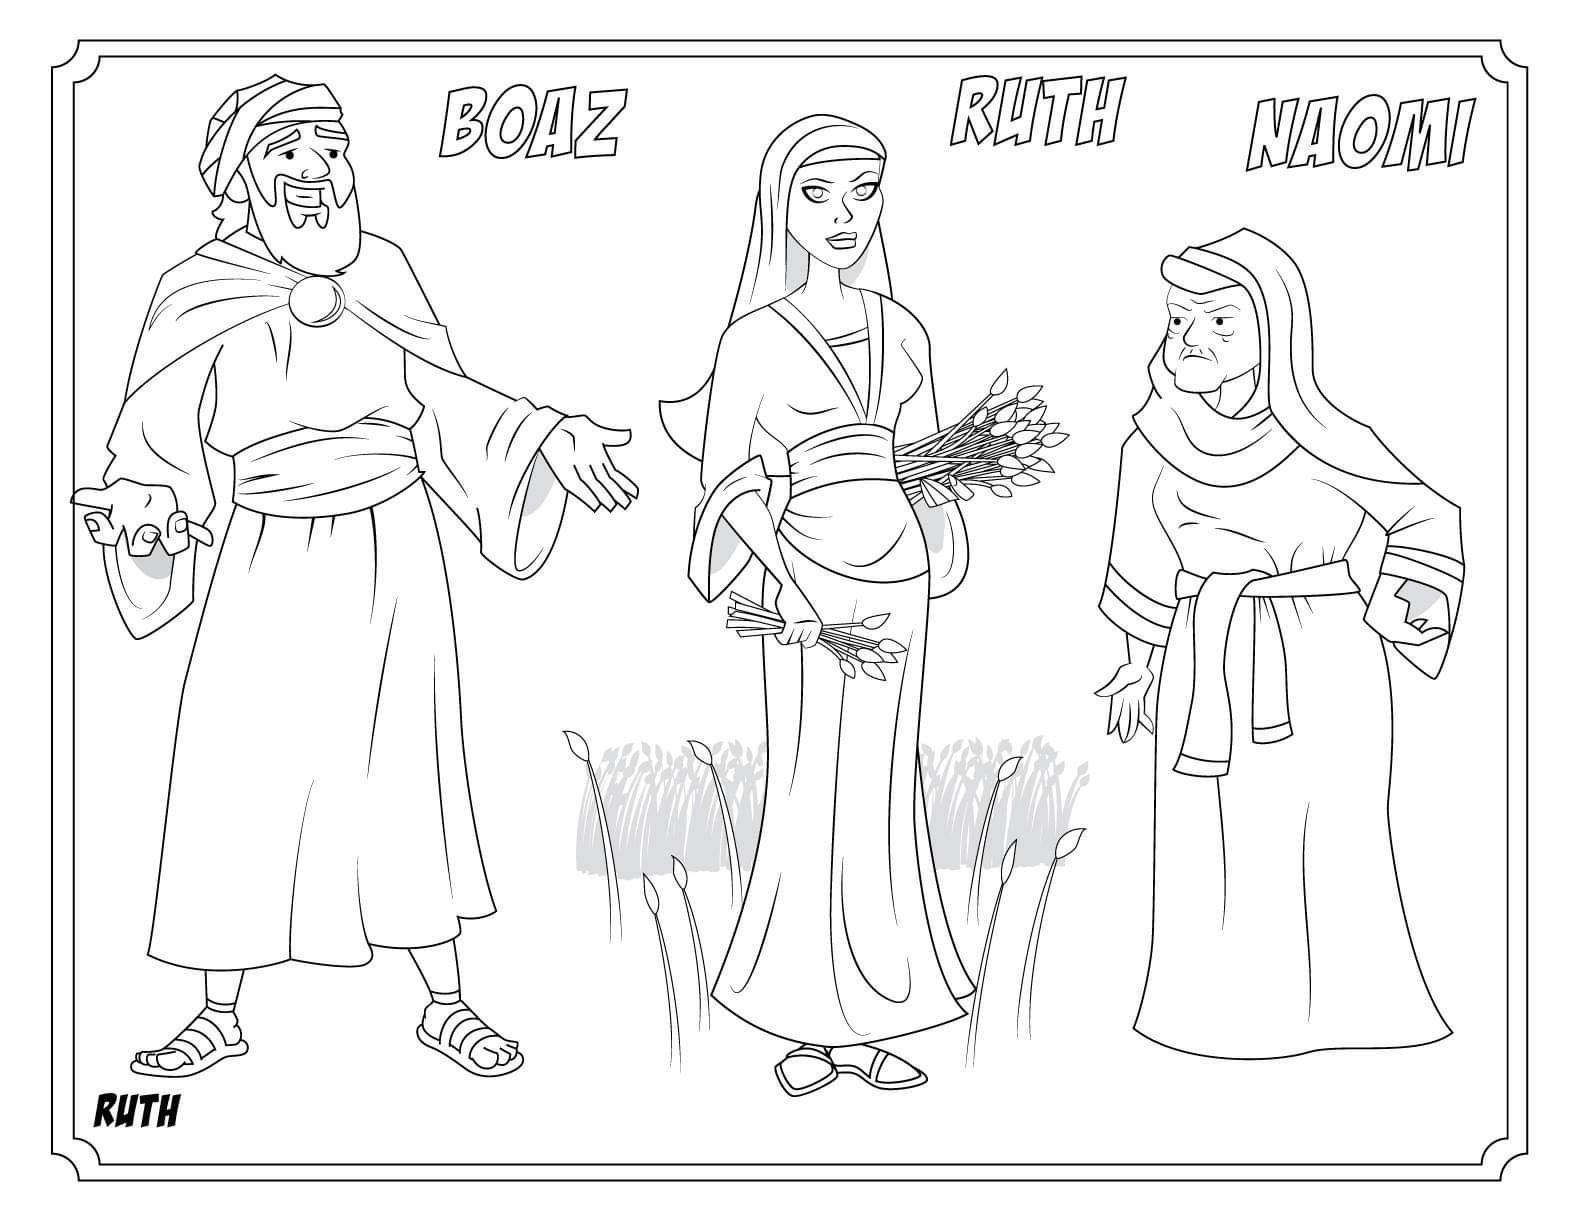 Ruth coloring page by jk